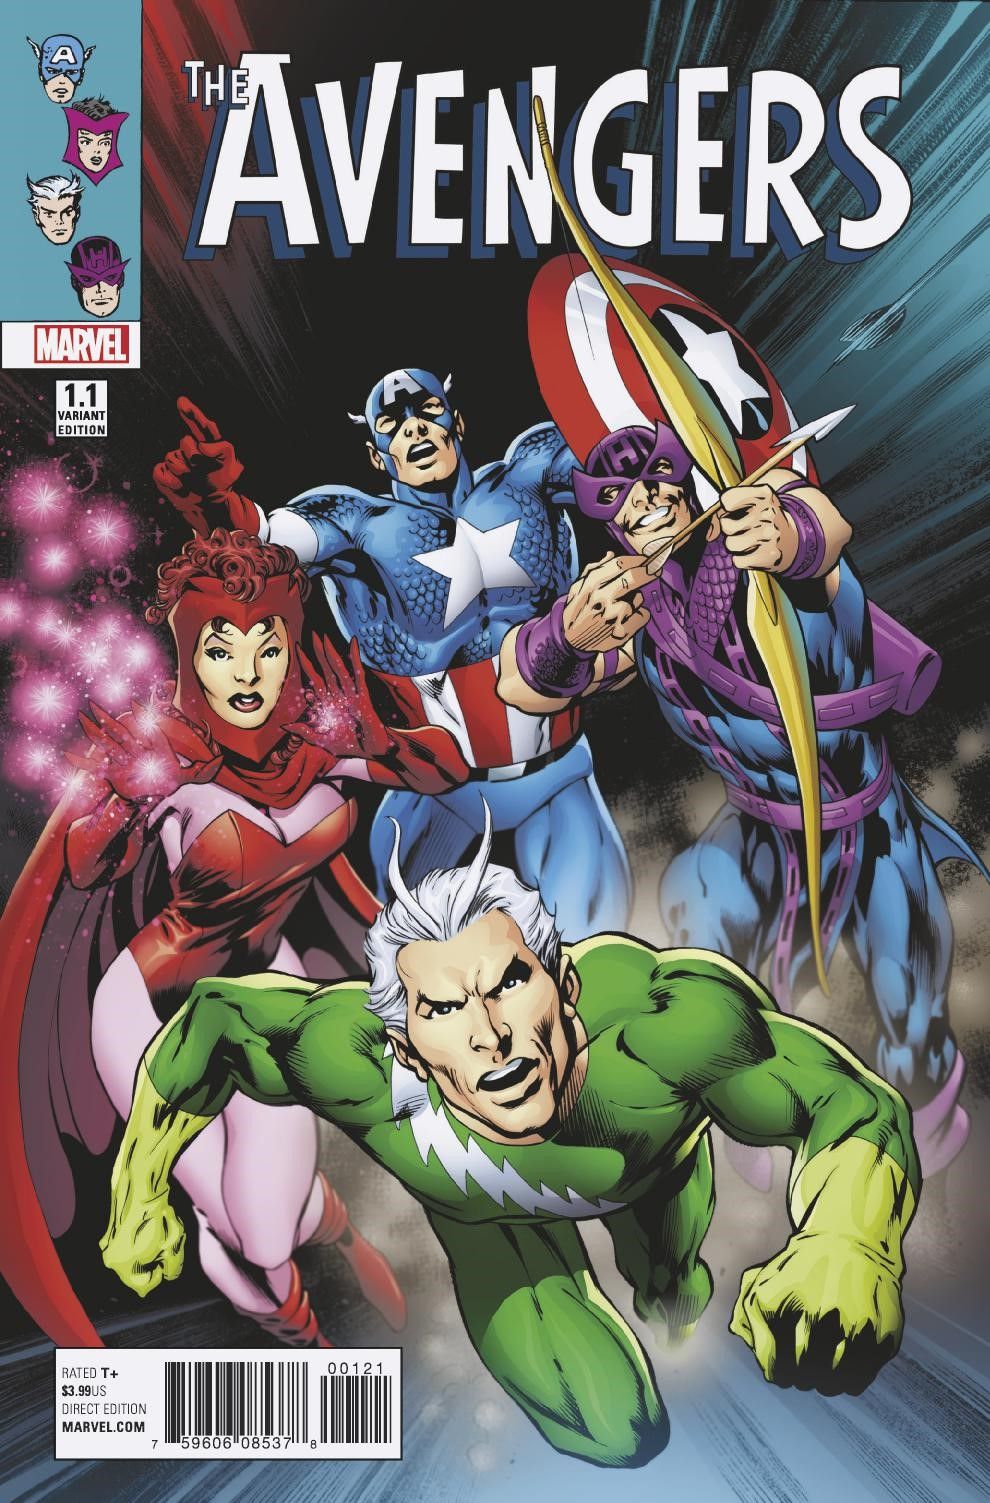 Avengers #1.1 (PREVIEW)